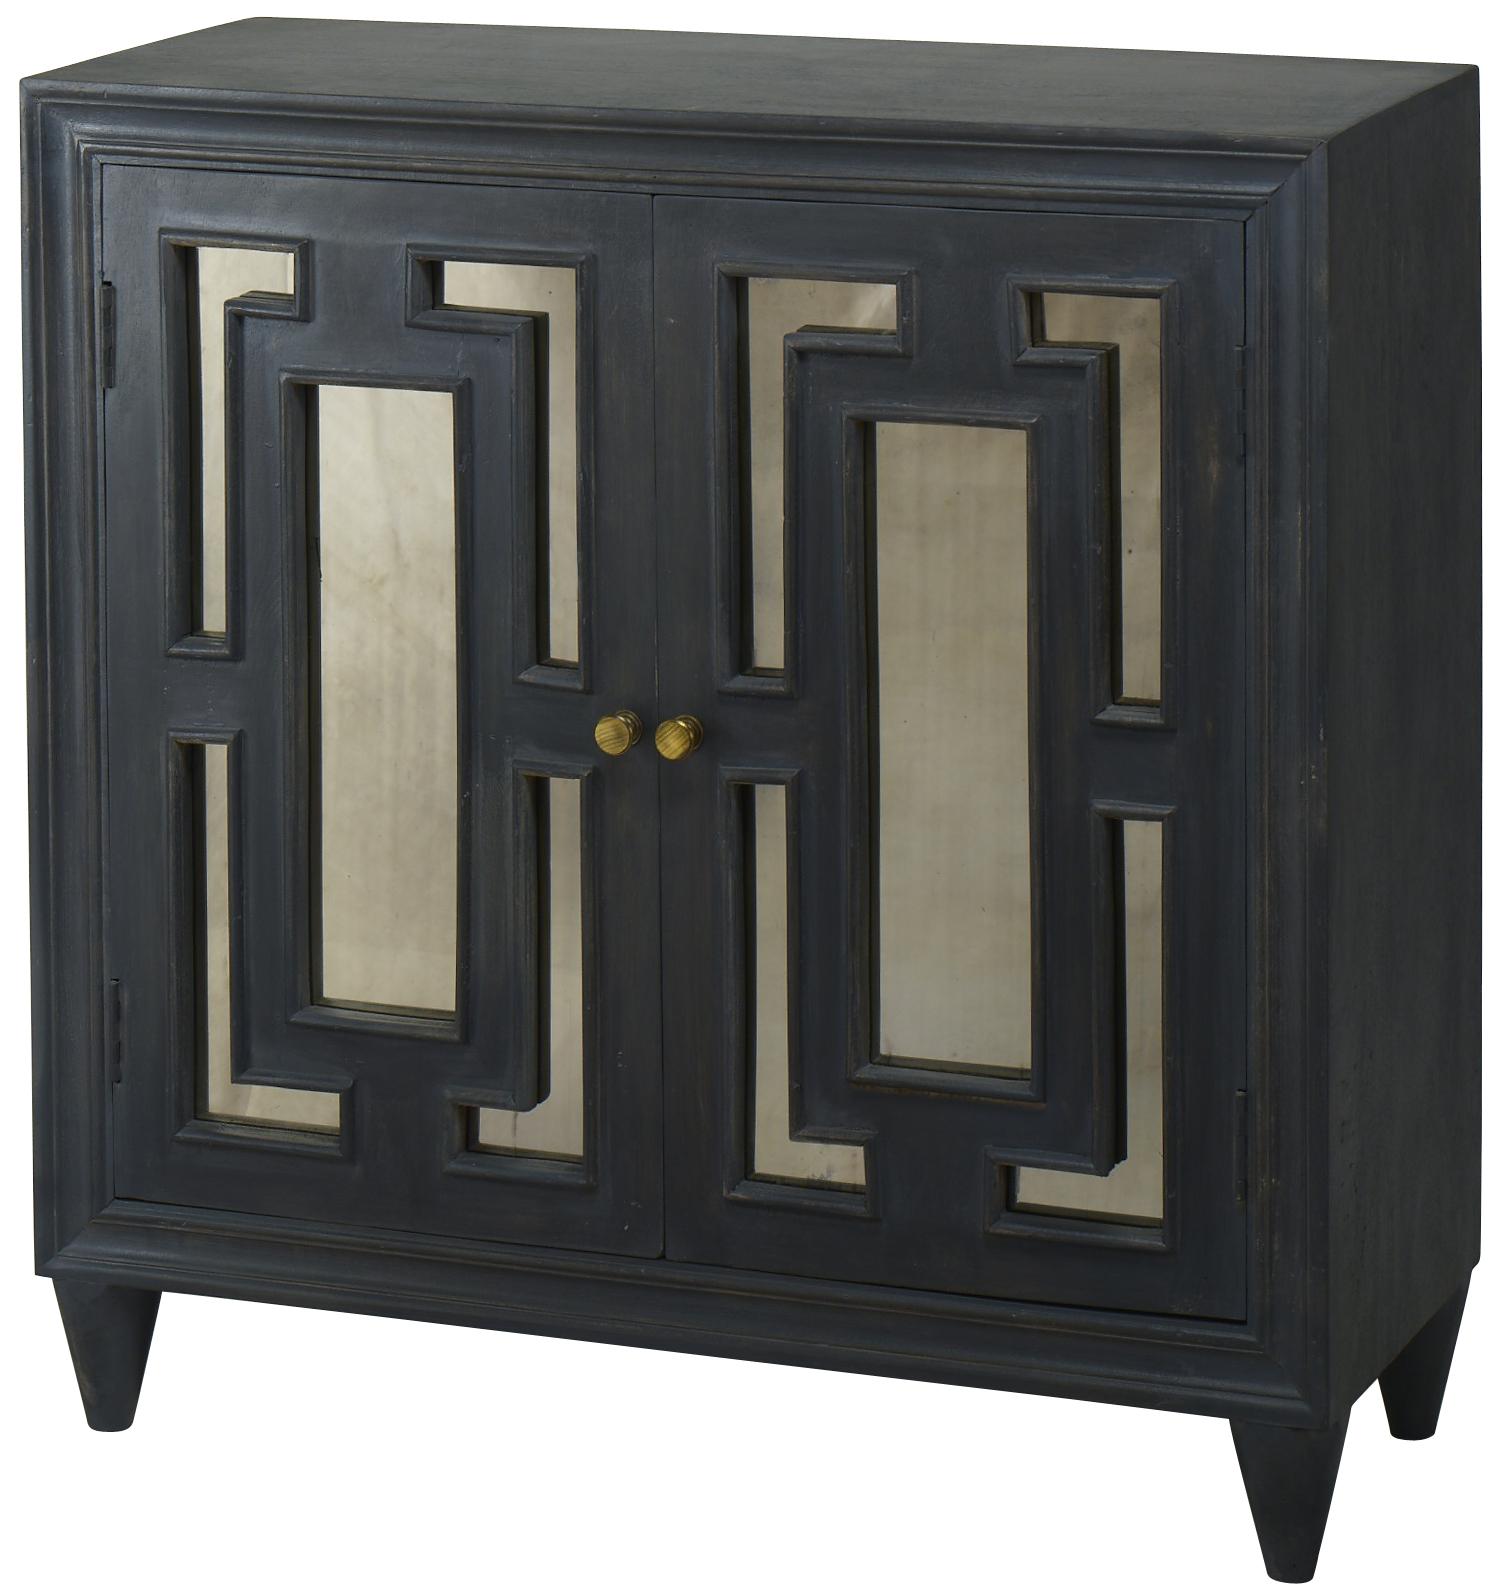 Transitional Cabinet ARA-9421 Haswell ARA-9421 in Gray 